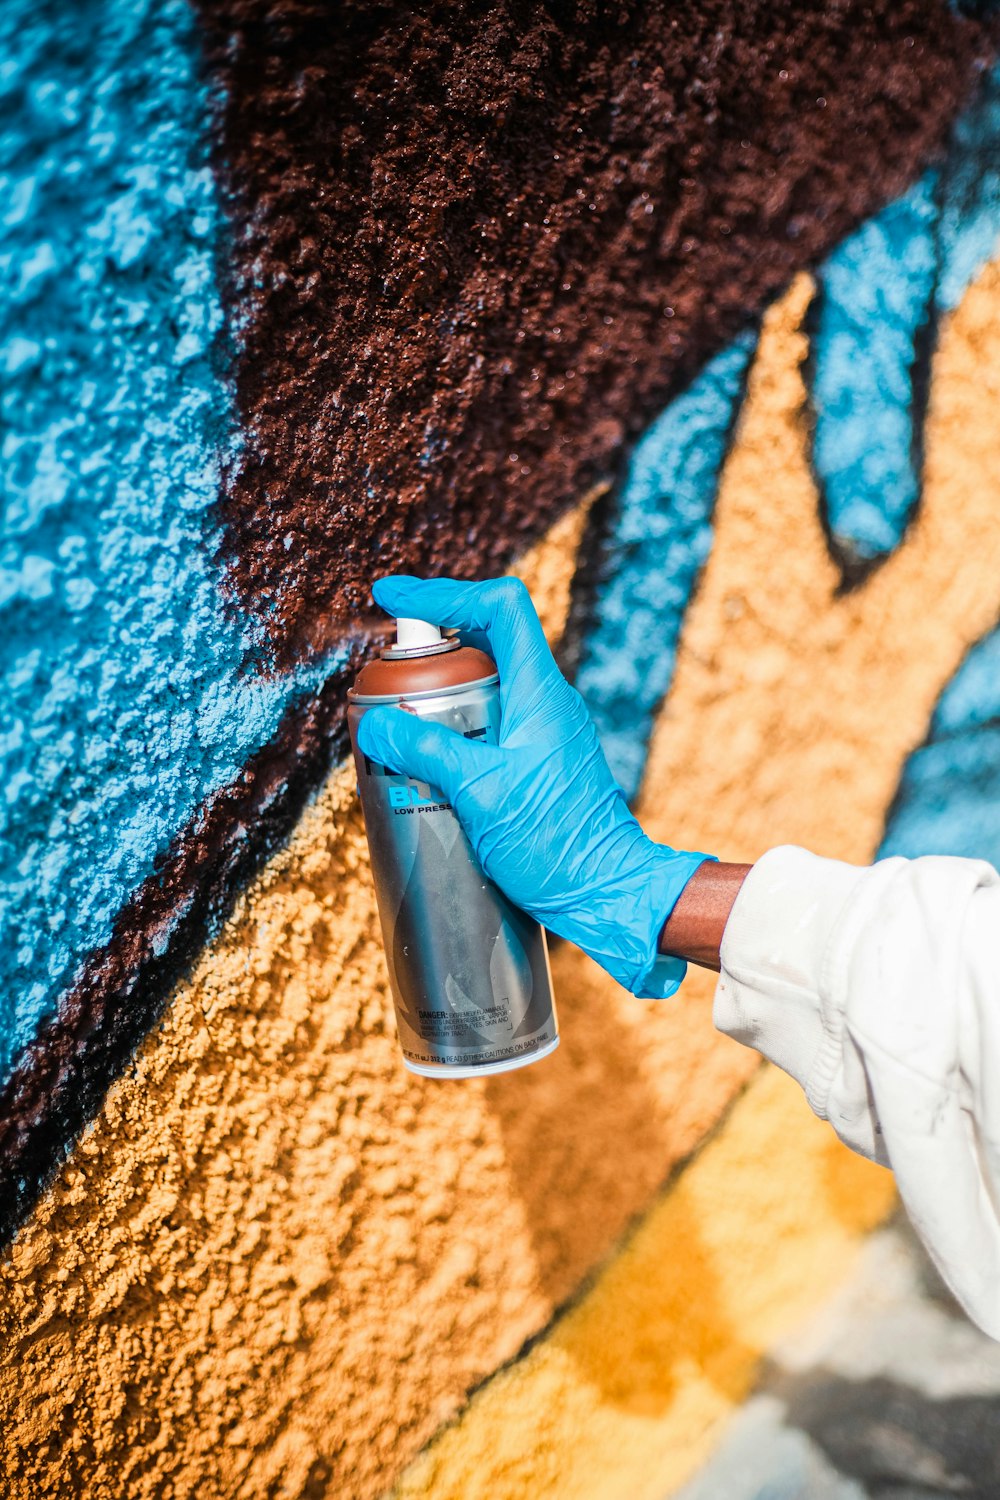 a person in blue gloves painting a wall